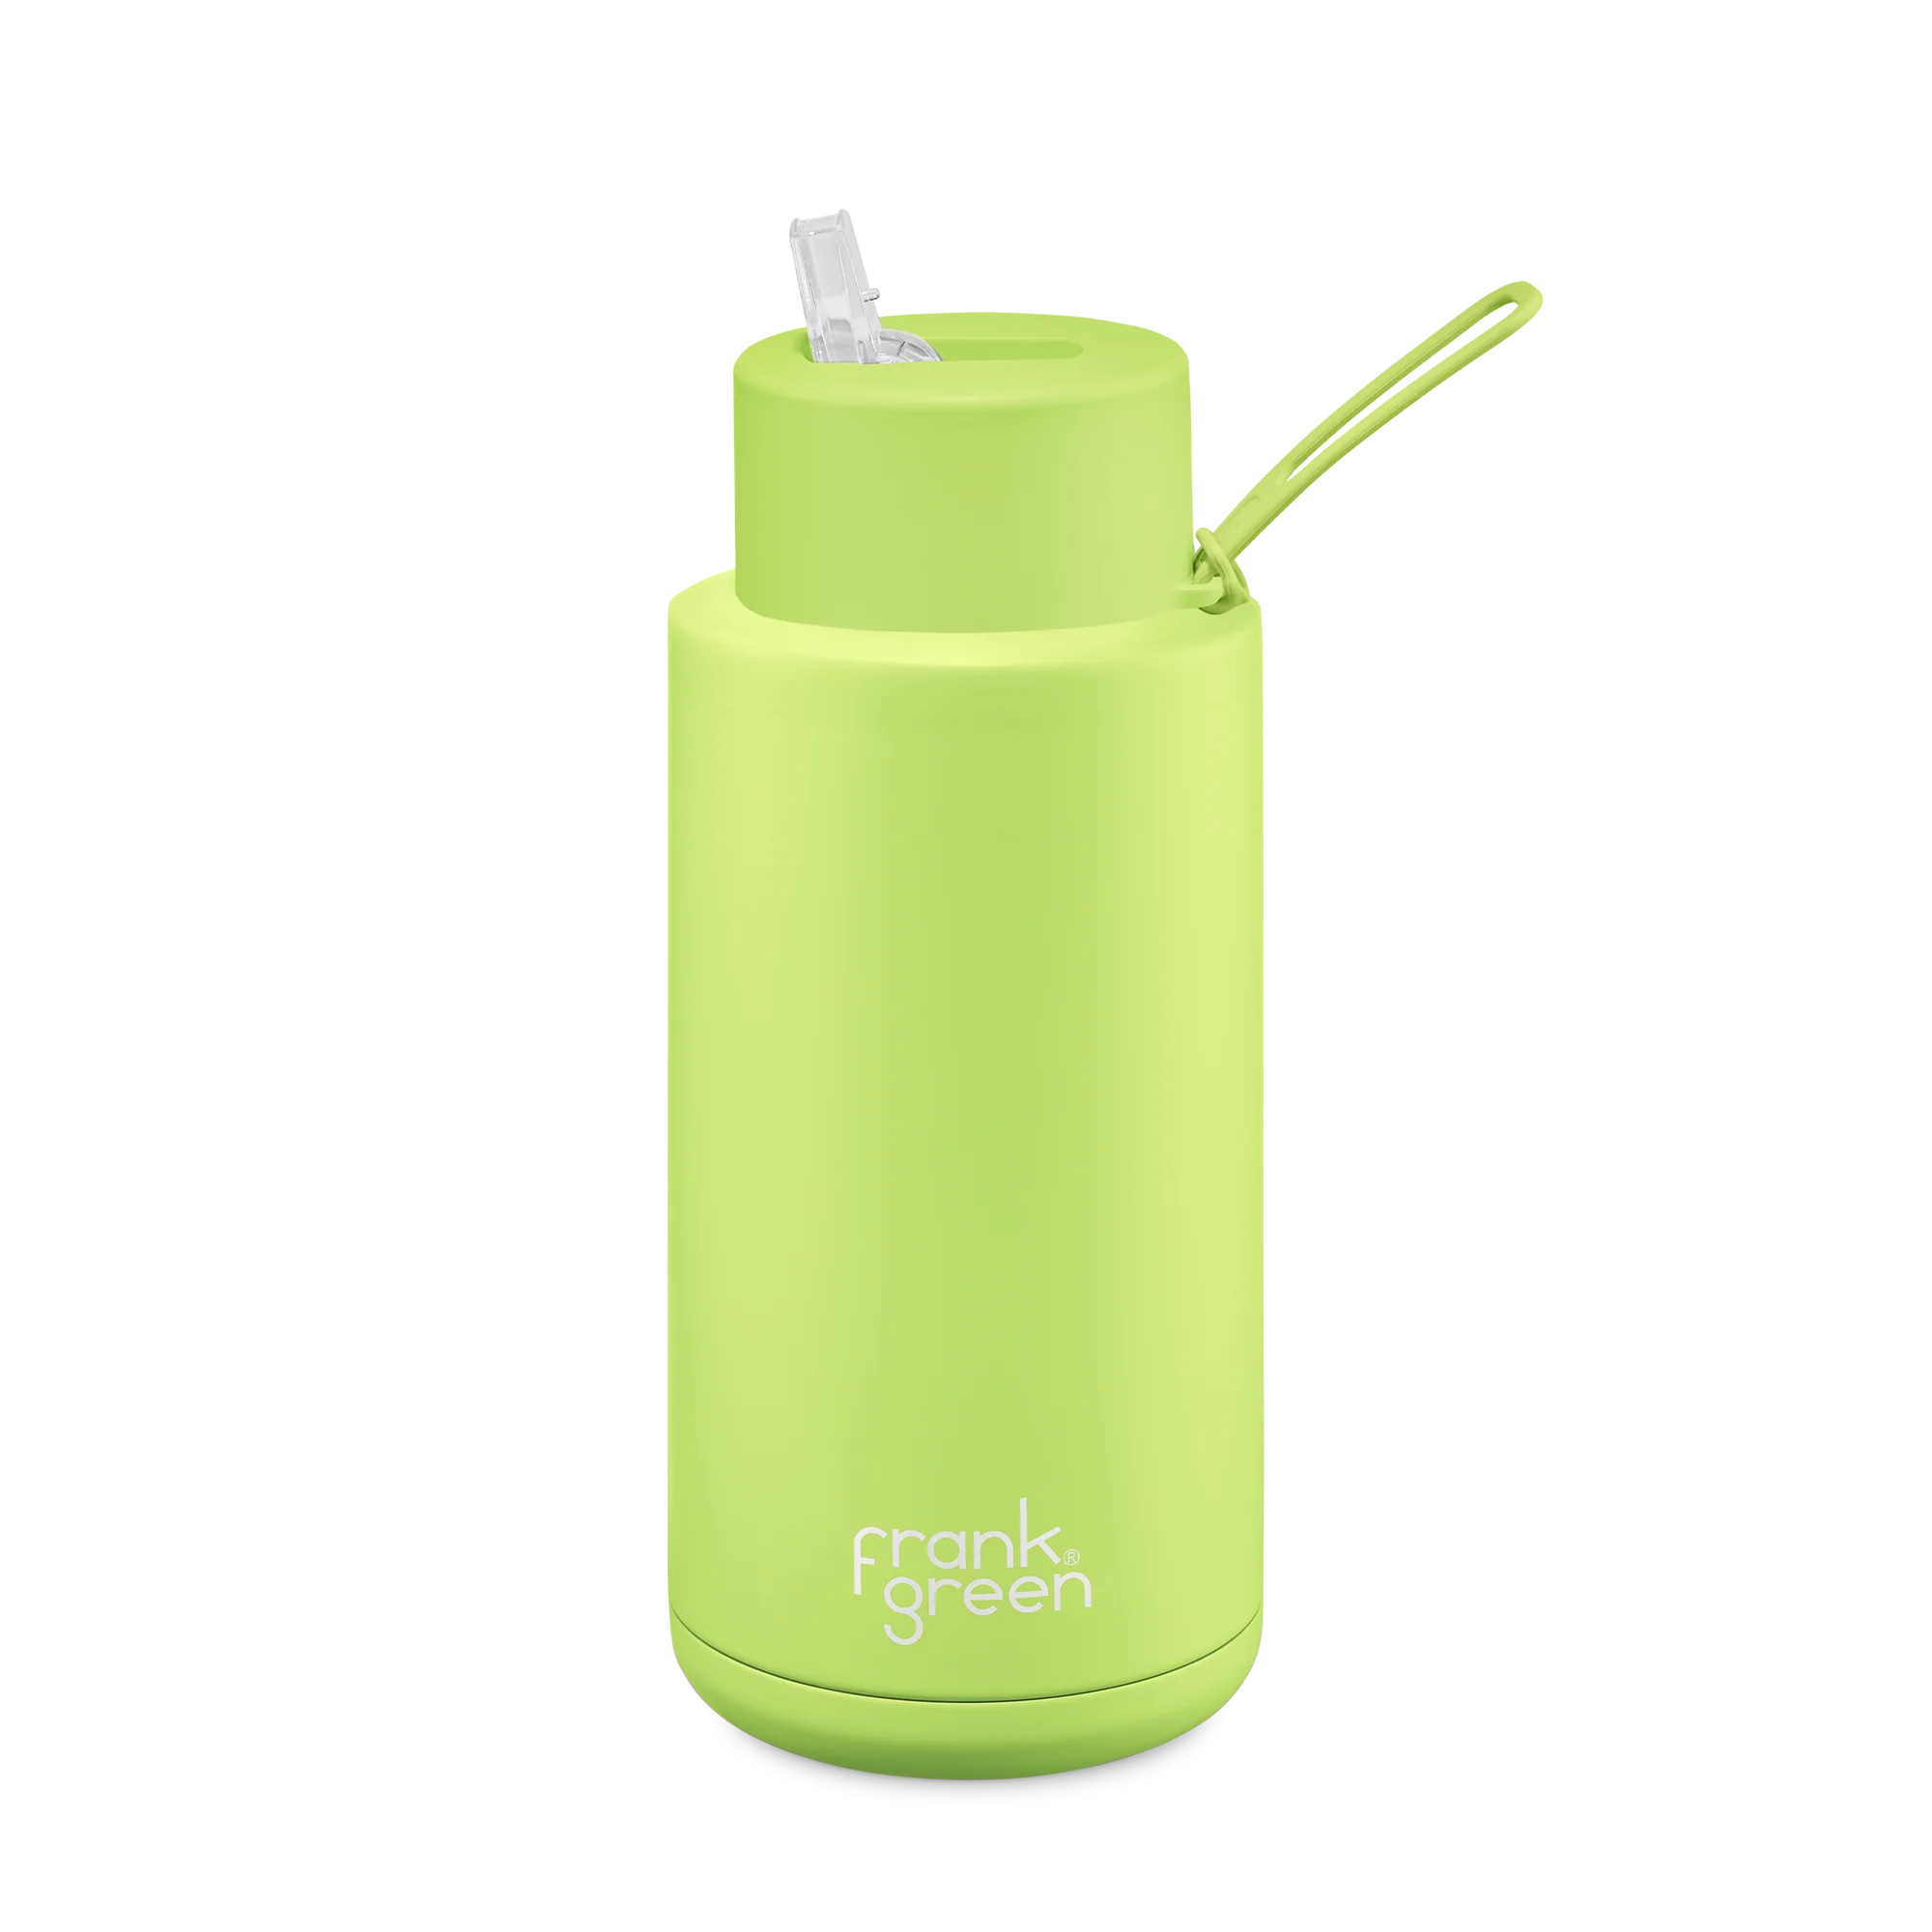 Frank Green Stainless Steel Ceramic Reusable Bottle Pistachio Green With Straw And Strap 34oz/1,000ml